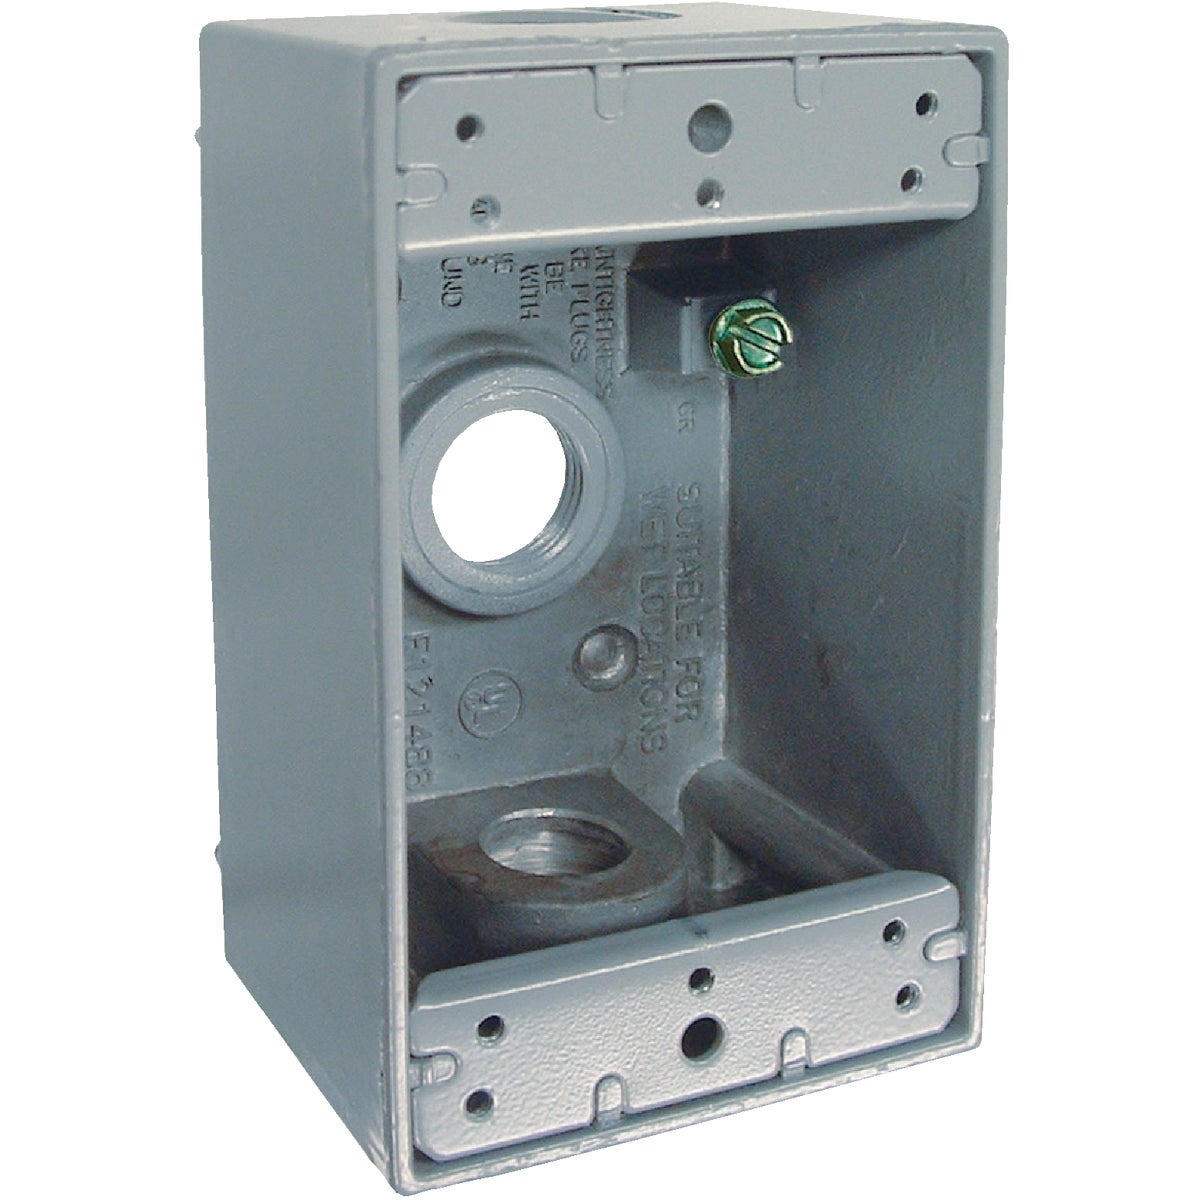 Item 507614, Single gang box with lugs, 2 inches deep with 3 outlets, 1/2-inch NPT (